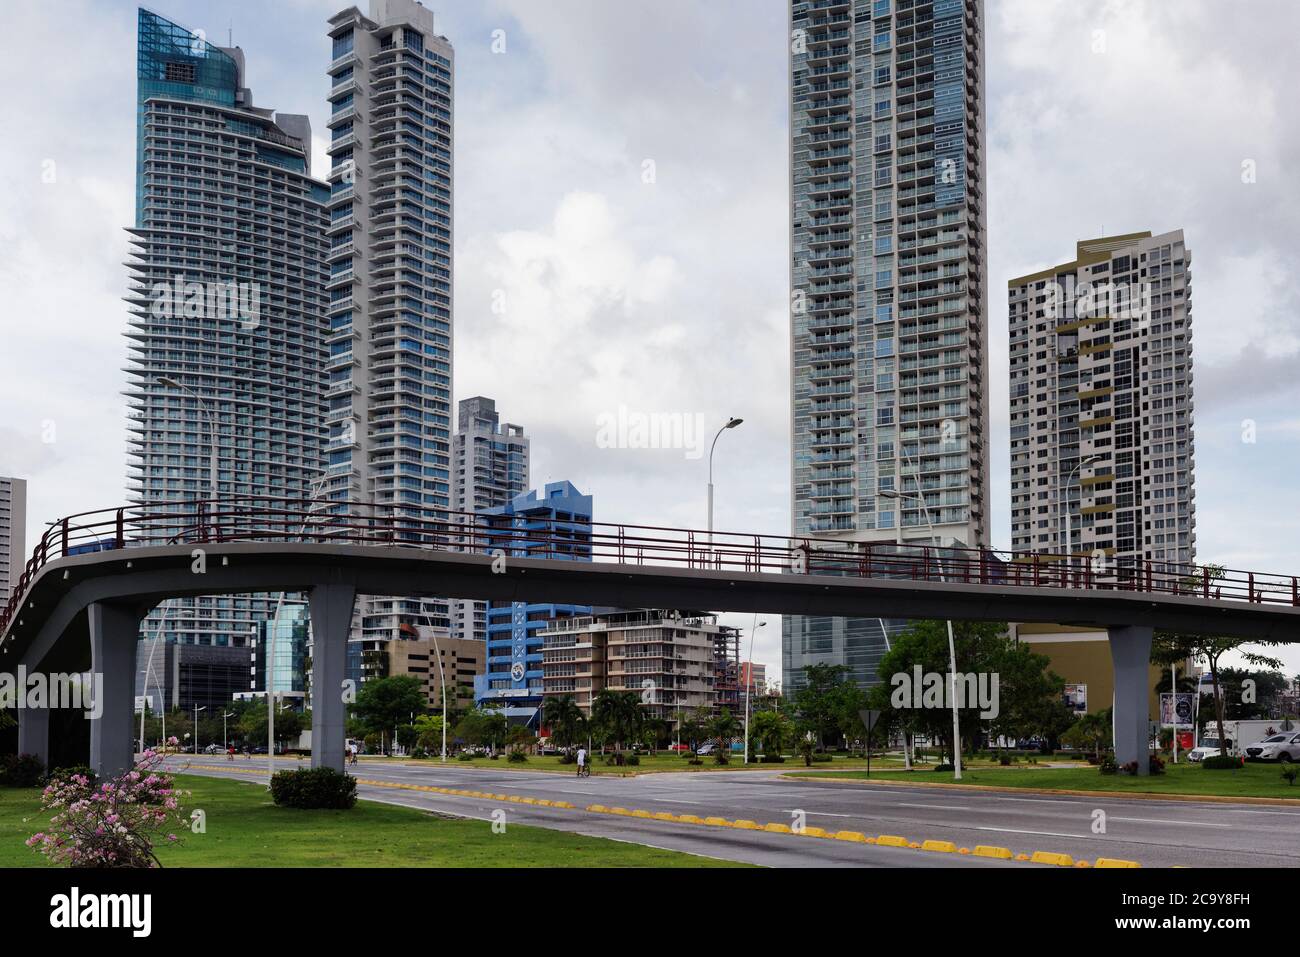 Empty roads on traffic free Sunday in Panama City with a flyer and tall buildings, Panama, Central America Stock Photo